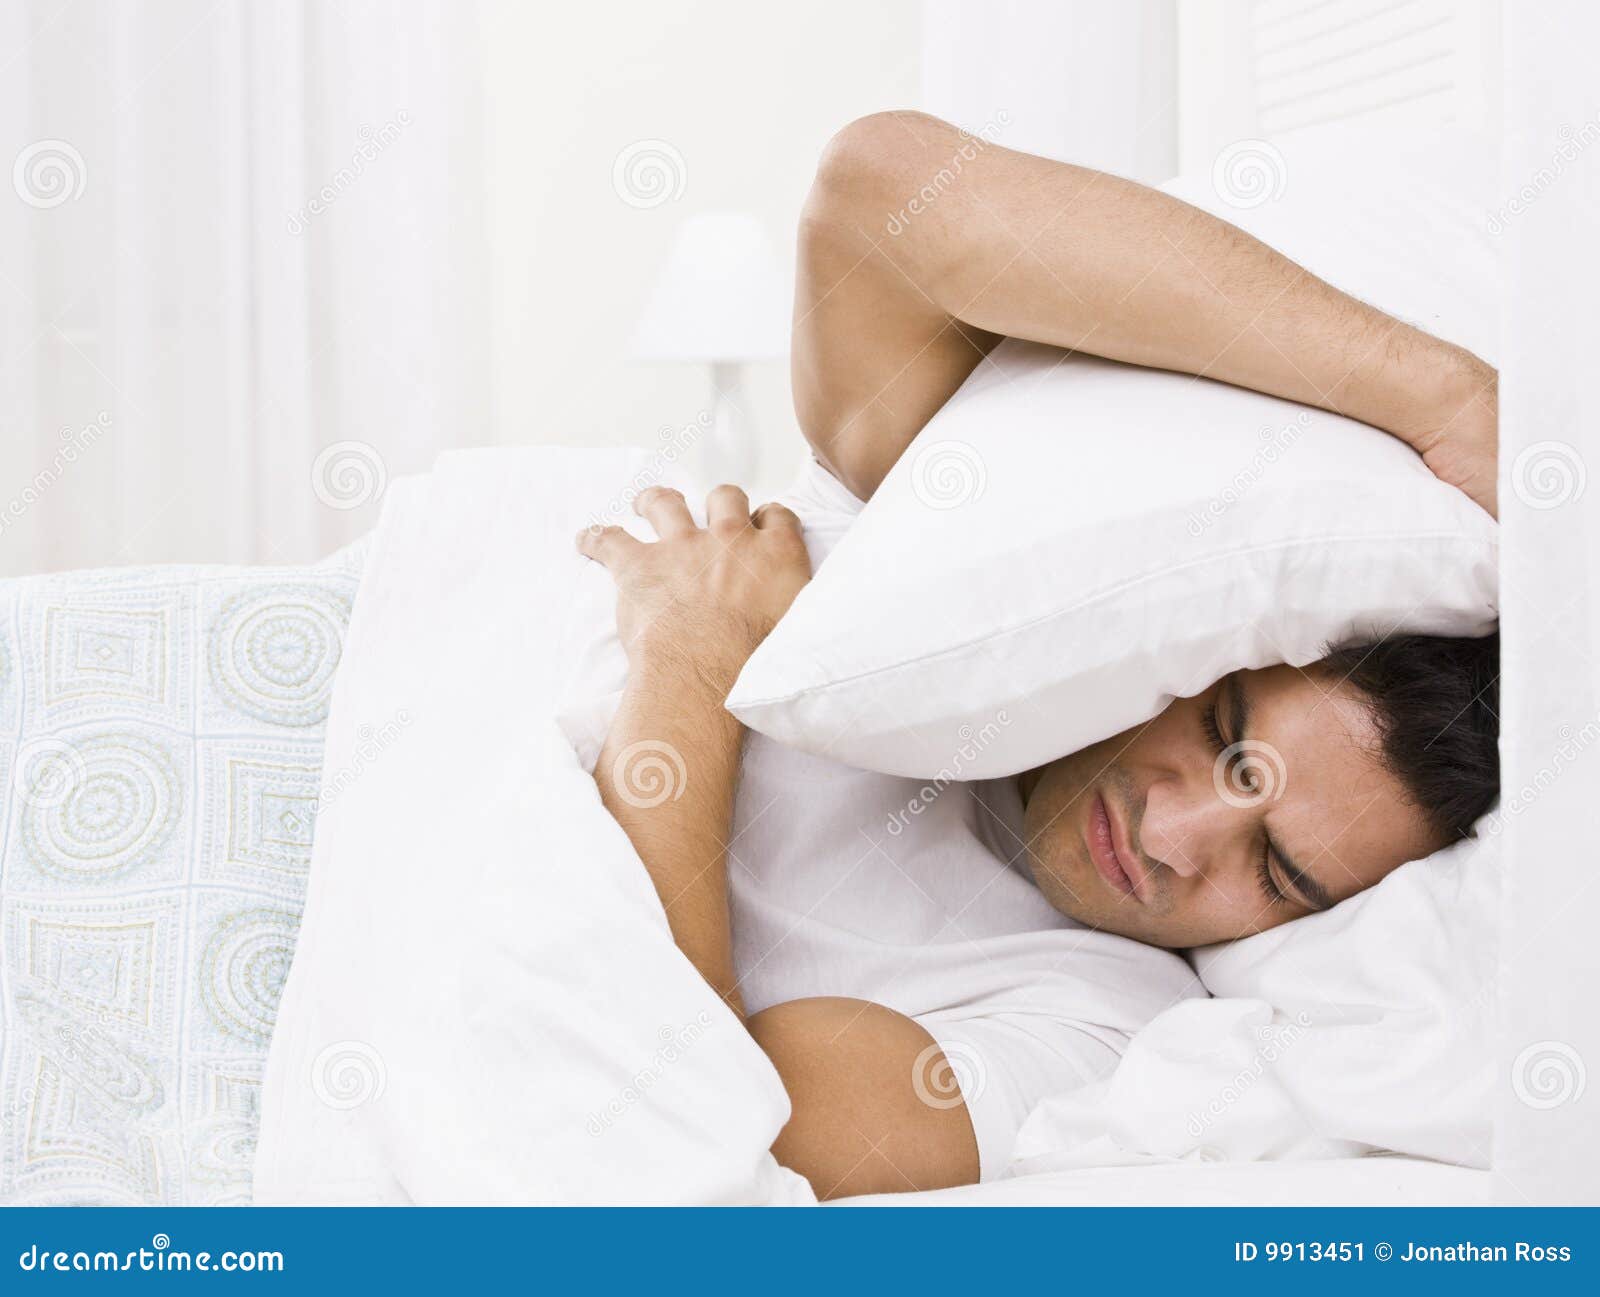 Tired Man Hiding His Head With Pillow Stock Image - Image 